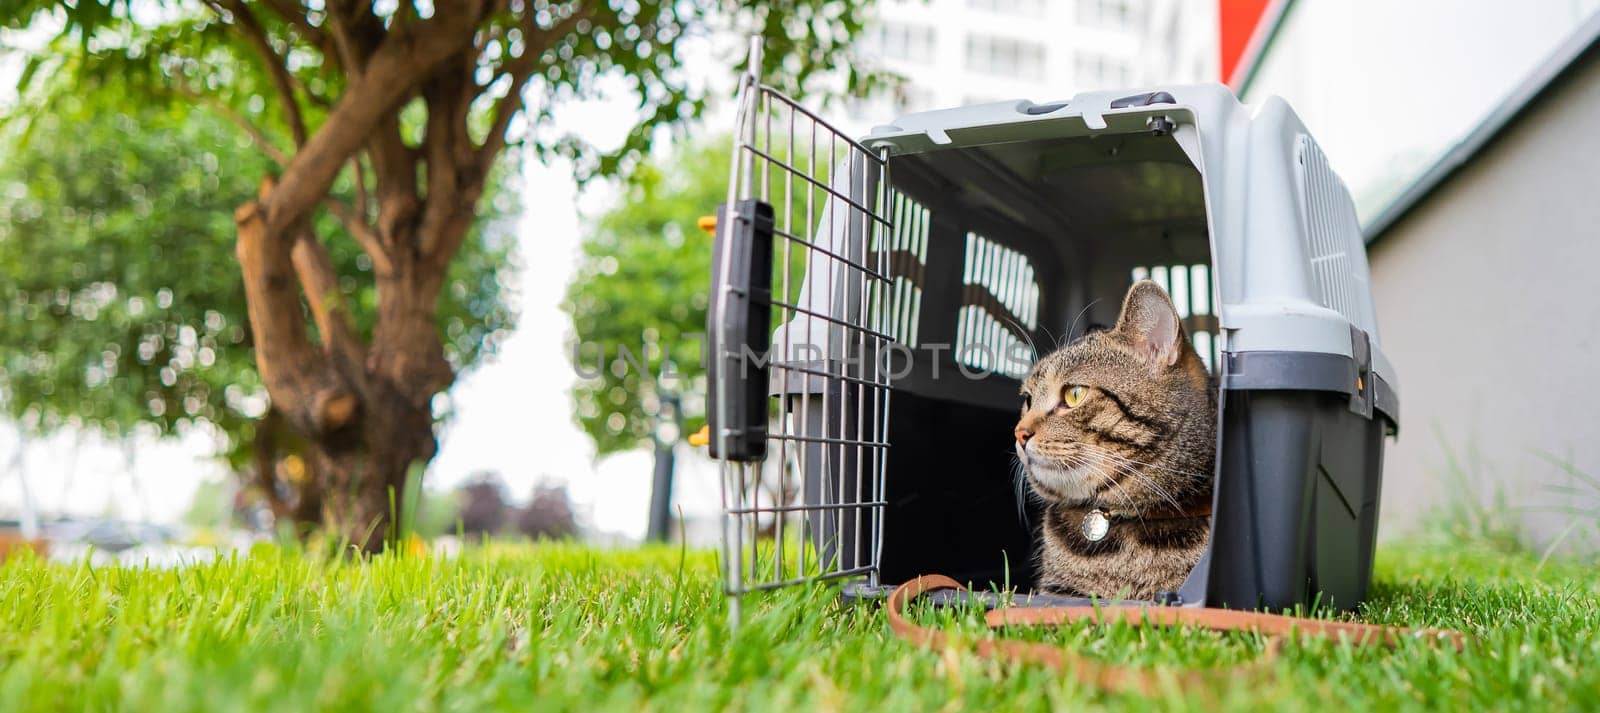 Calm confident gray tabby cat lies in a carrier on green grass outdoors. by mrwed54